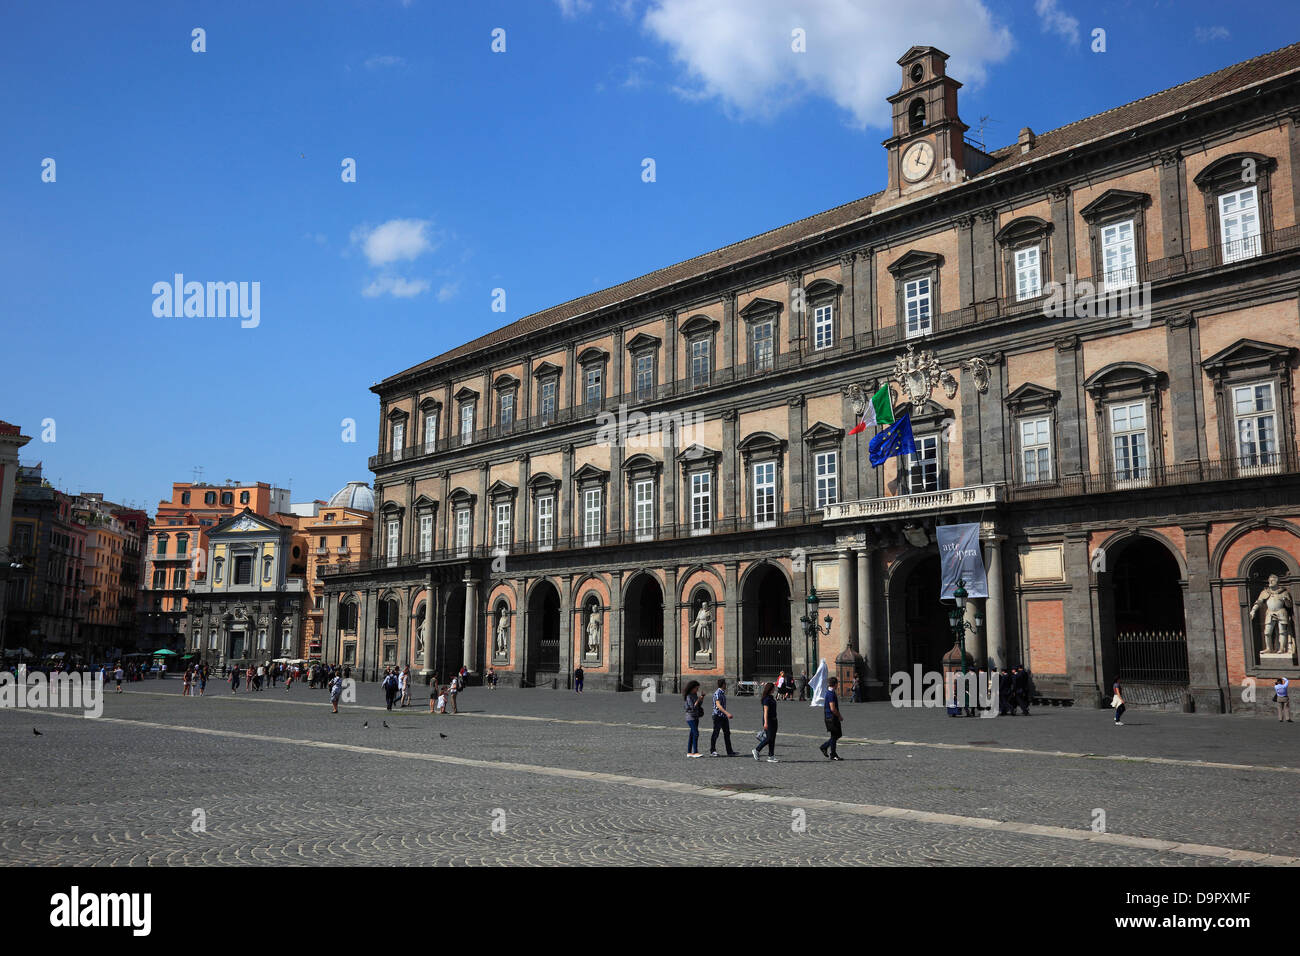 Royal Palace, Palace of the Vice-kings, in the Piazza del Plebescito, Naples, Campania, Italy Stock Photo